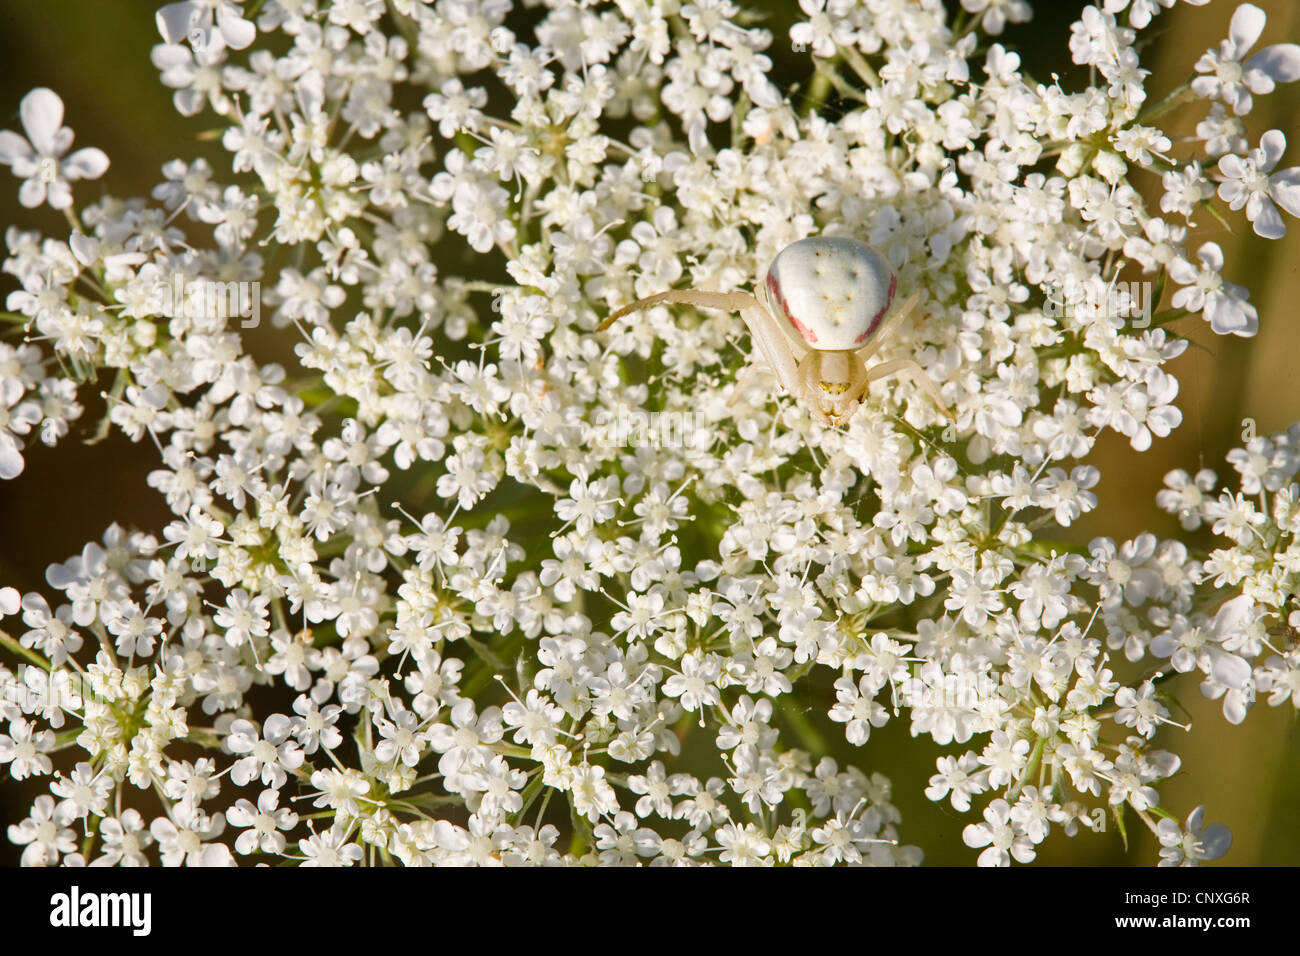 goldenrod crab spider (Misumena vatia), well camouflaged individual sitting on the inflorescence of wild carrot, Germany, Baden-Wuerttemberg Stock Photo